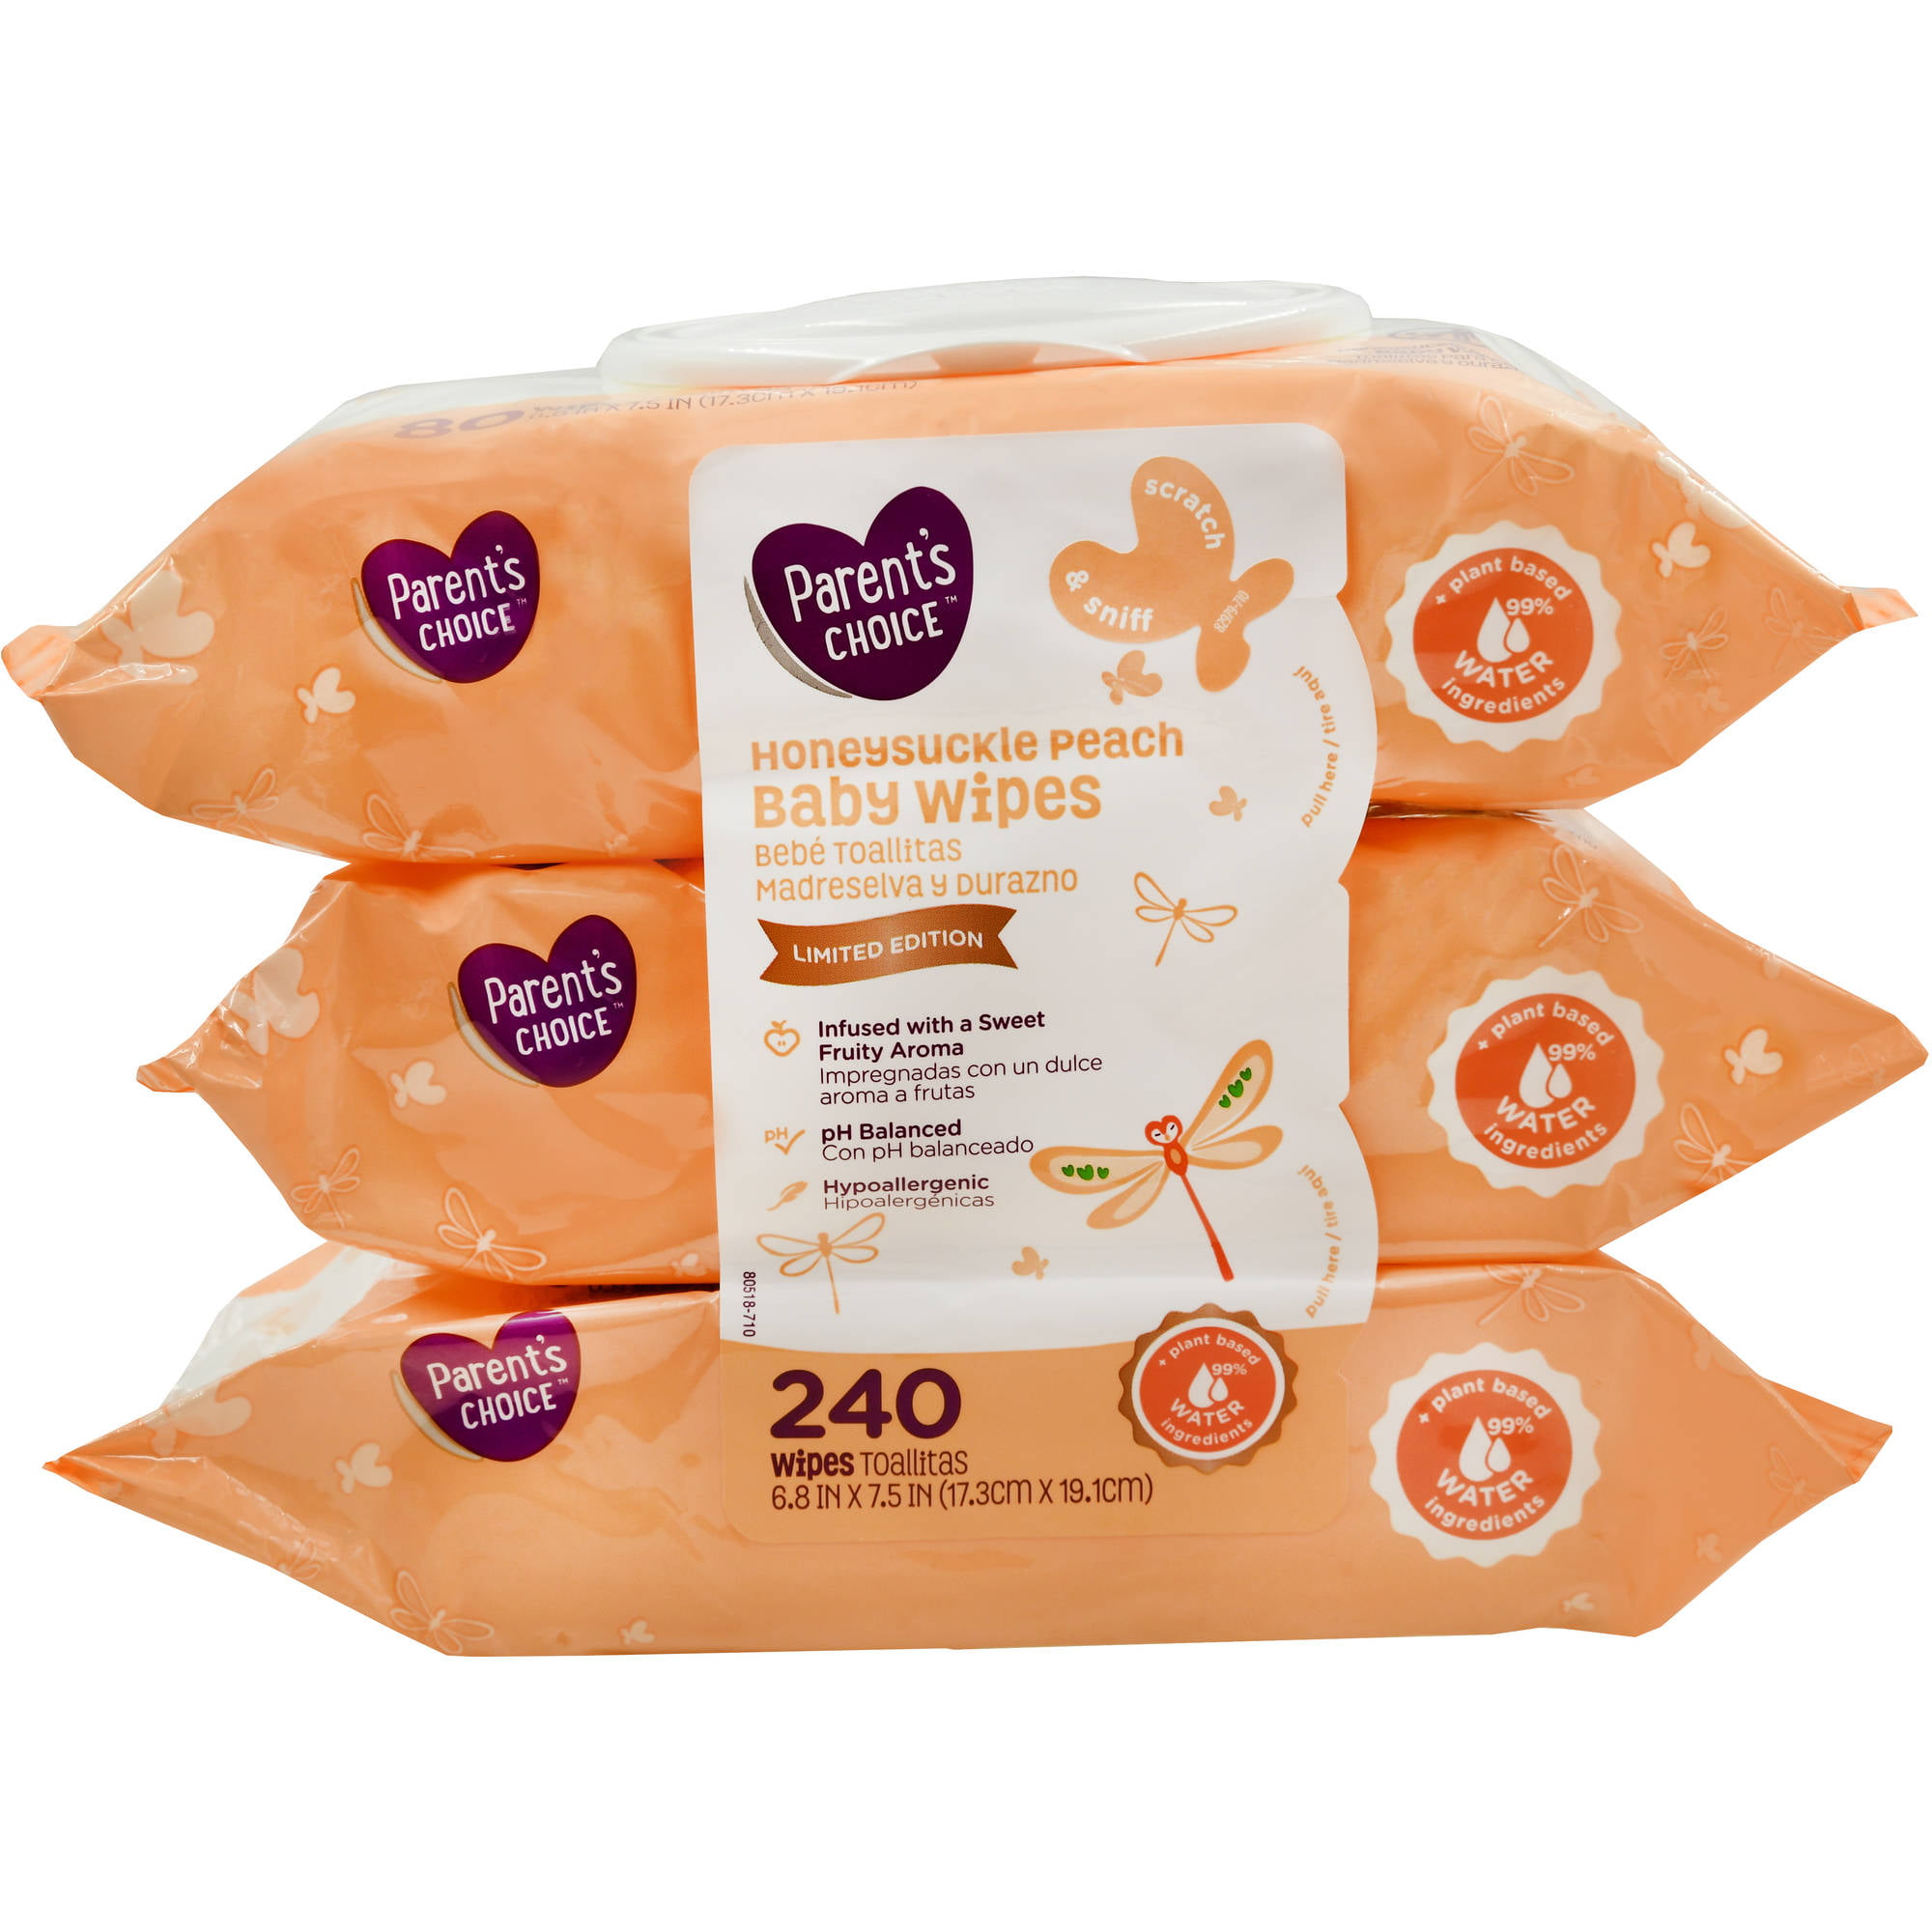 Parent's Choice Honeysuckle Peach Baby Wipes, Limited Edition, 240 count (3 packs of 80)